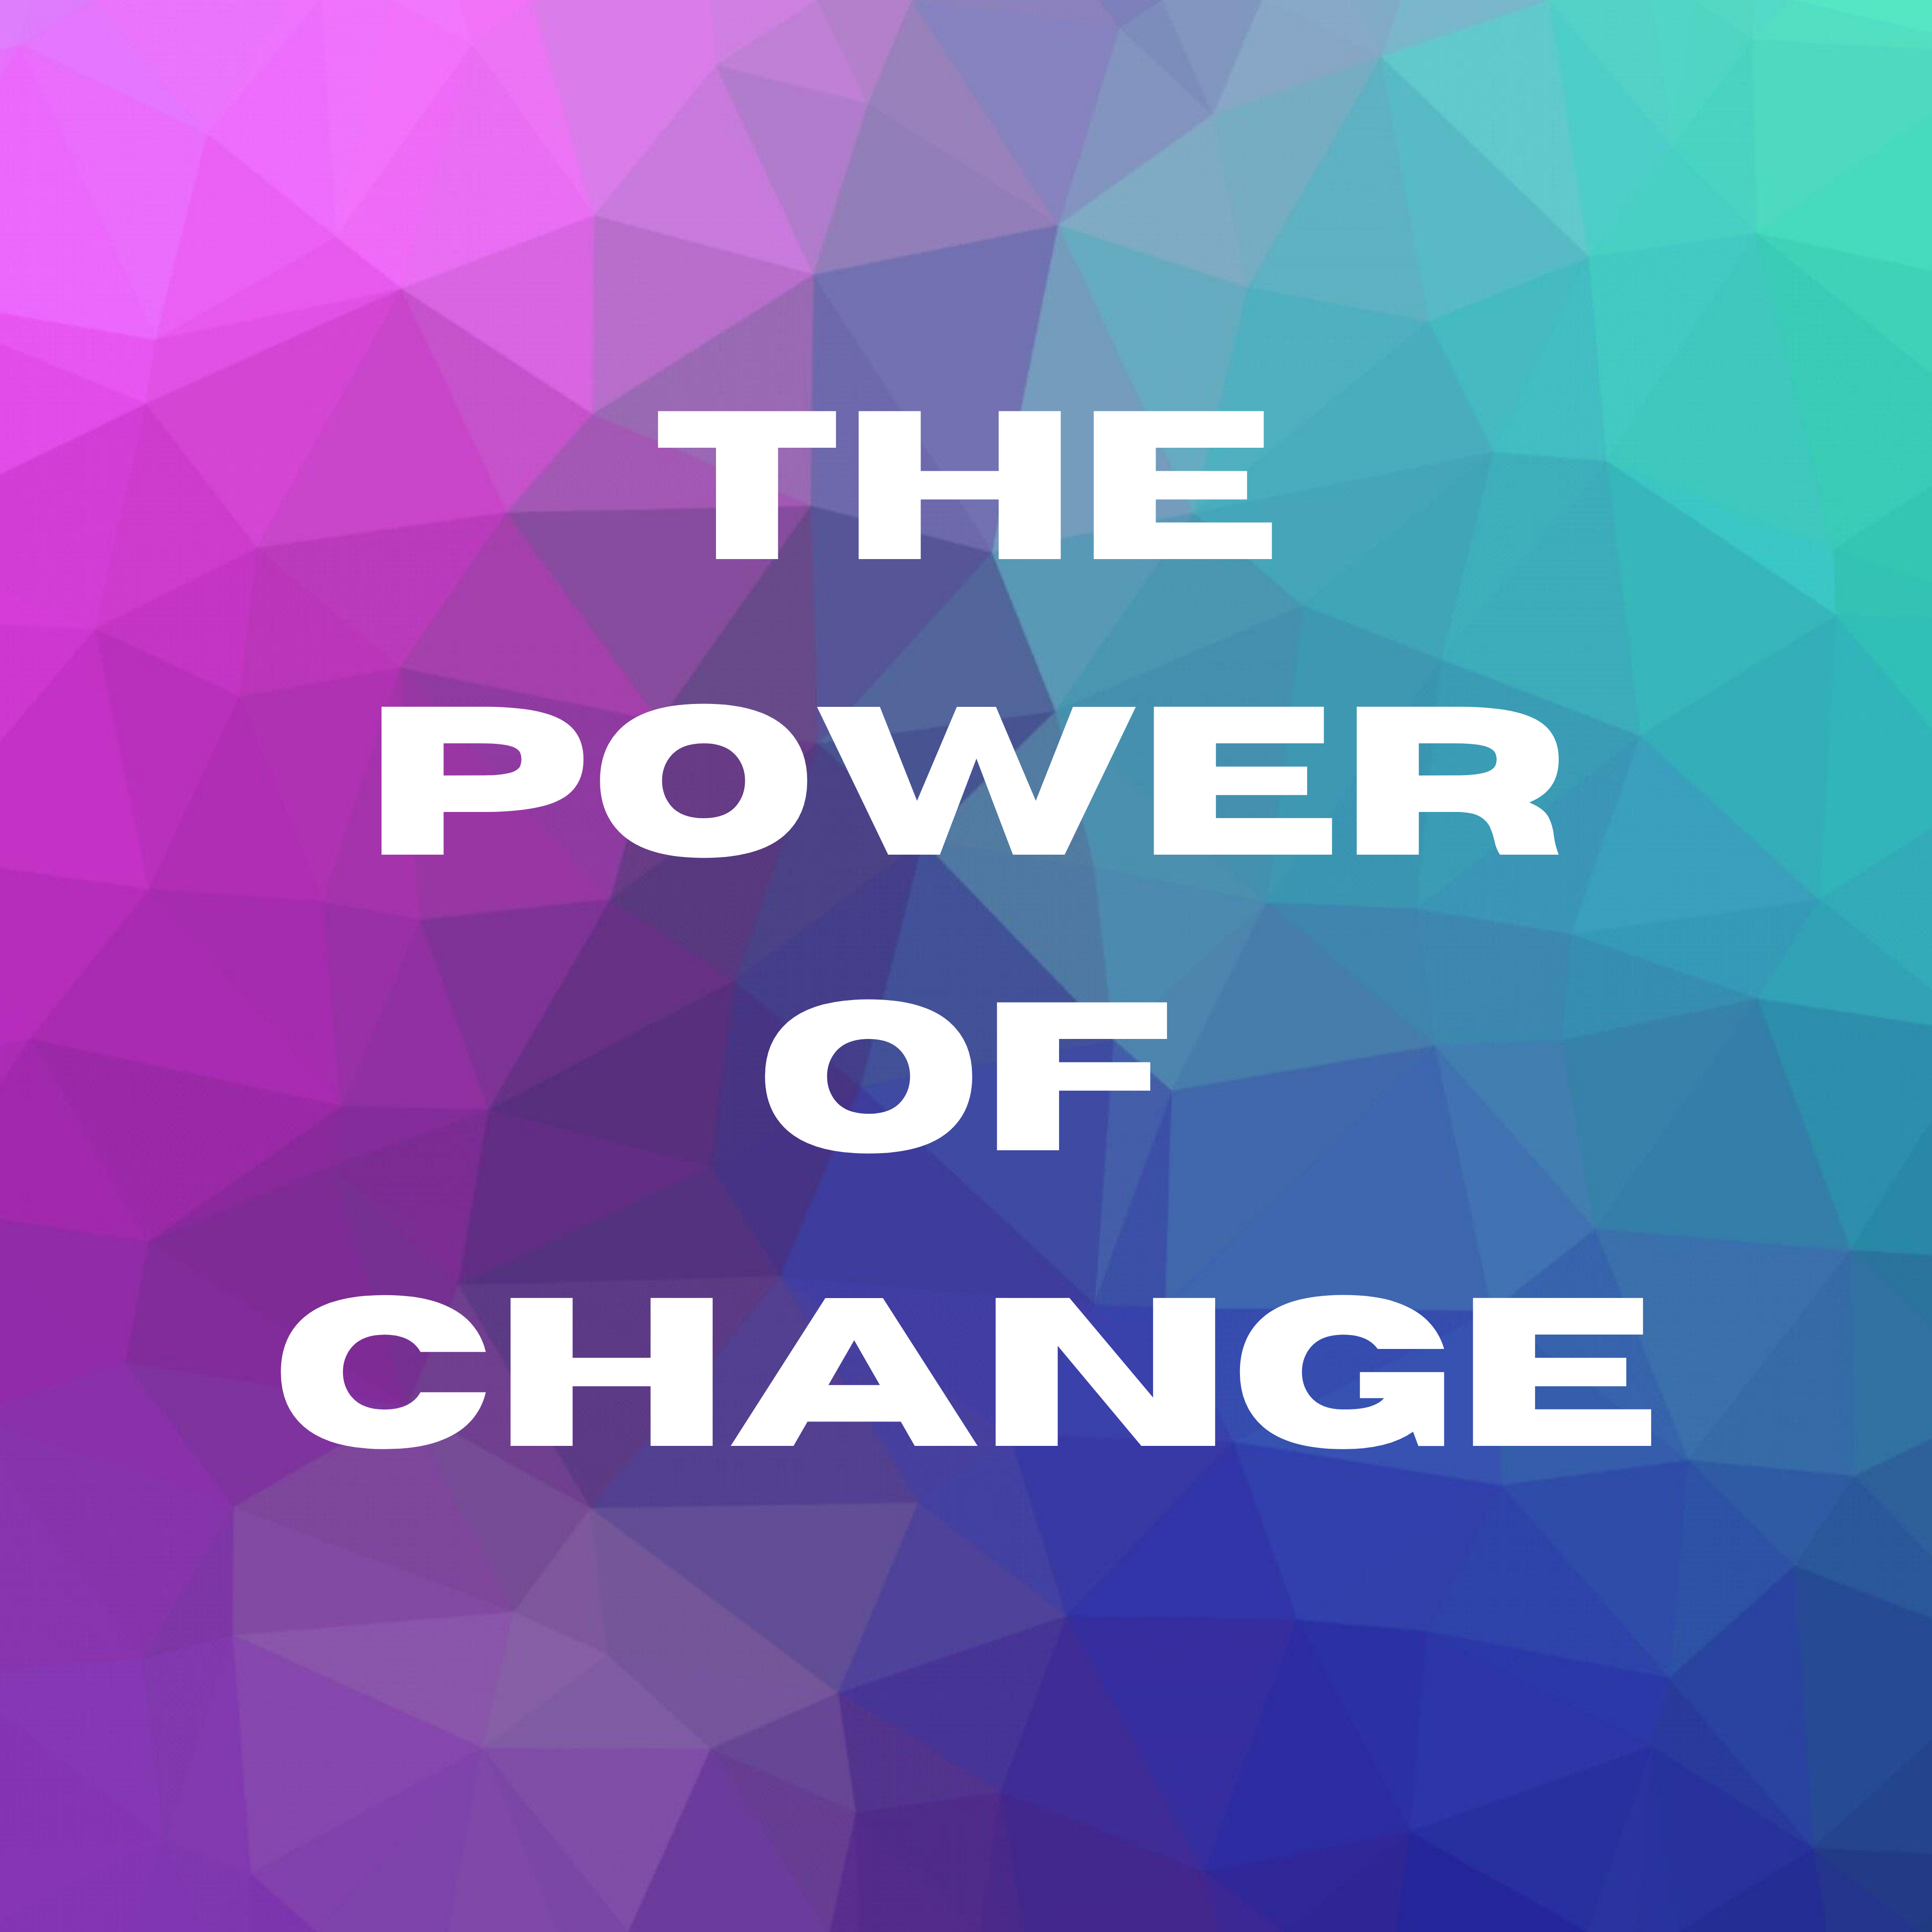 Power of Thought – The Life Changer